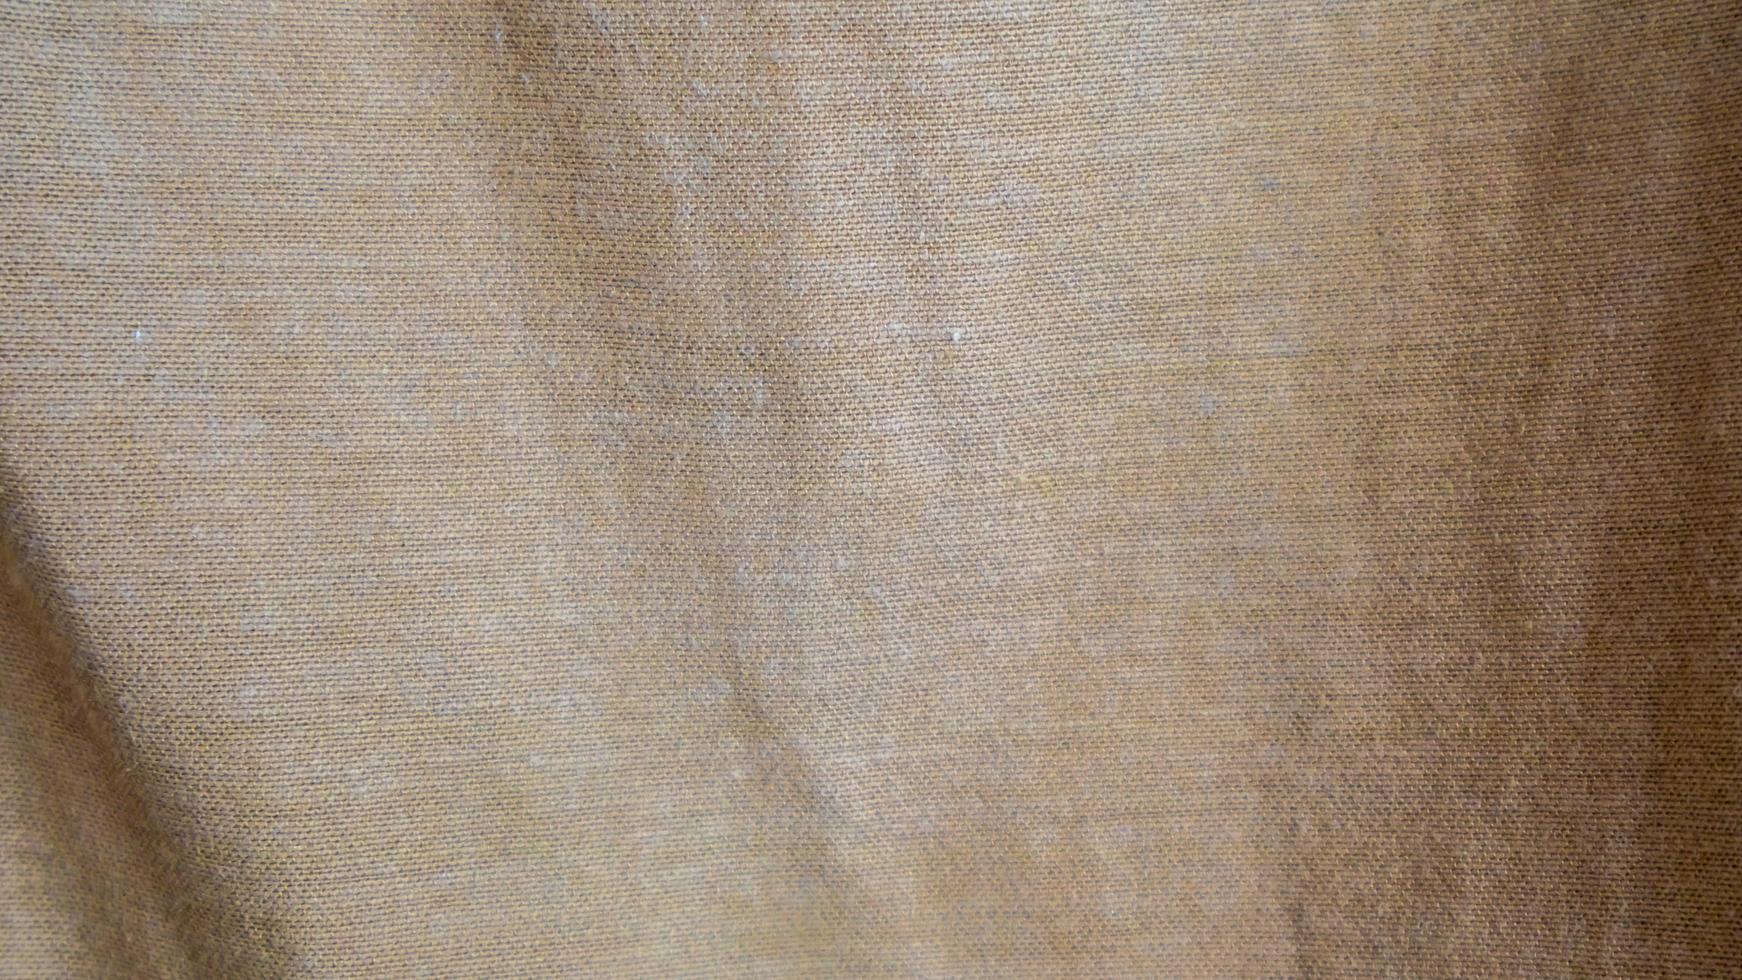 brown cloth texture as background photo